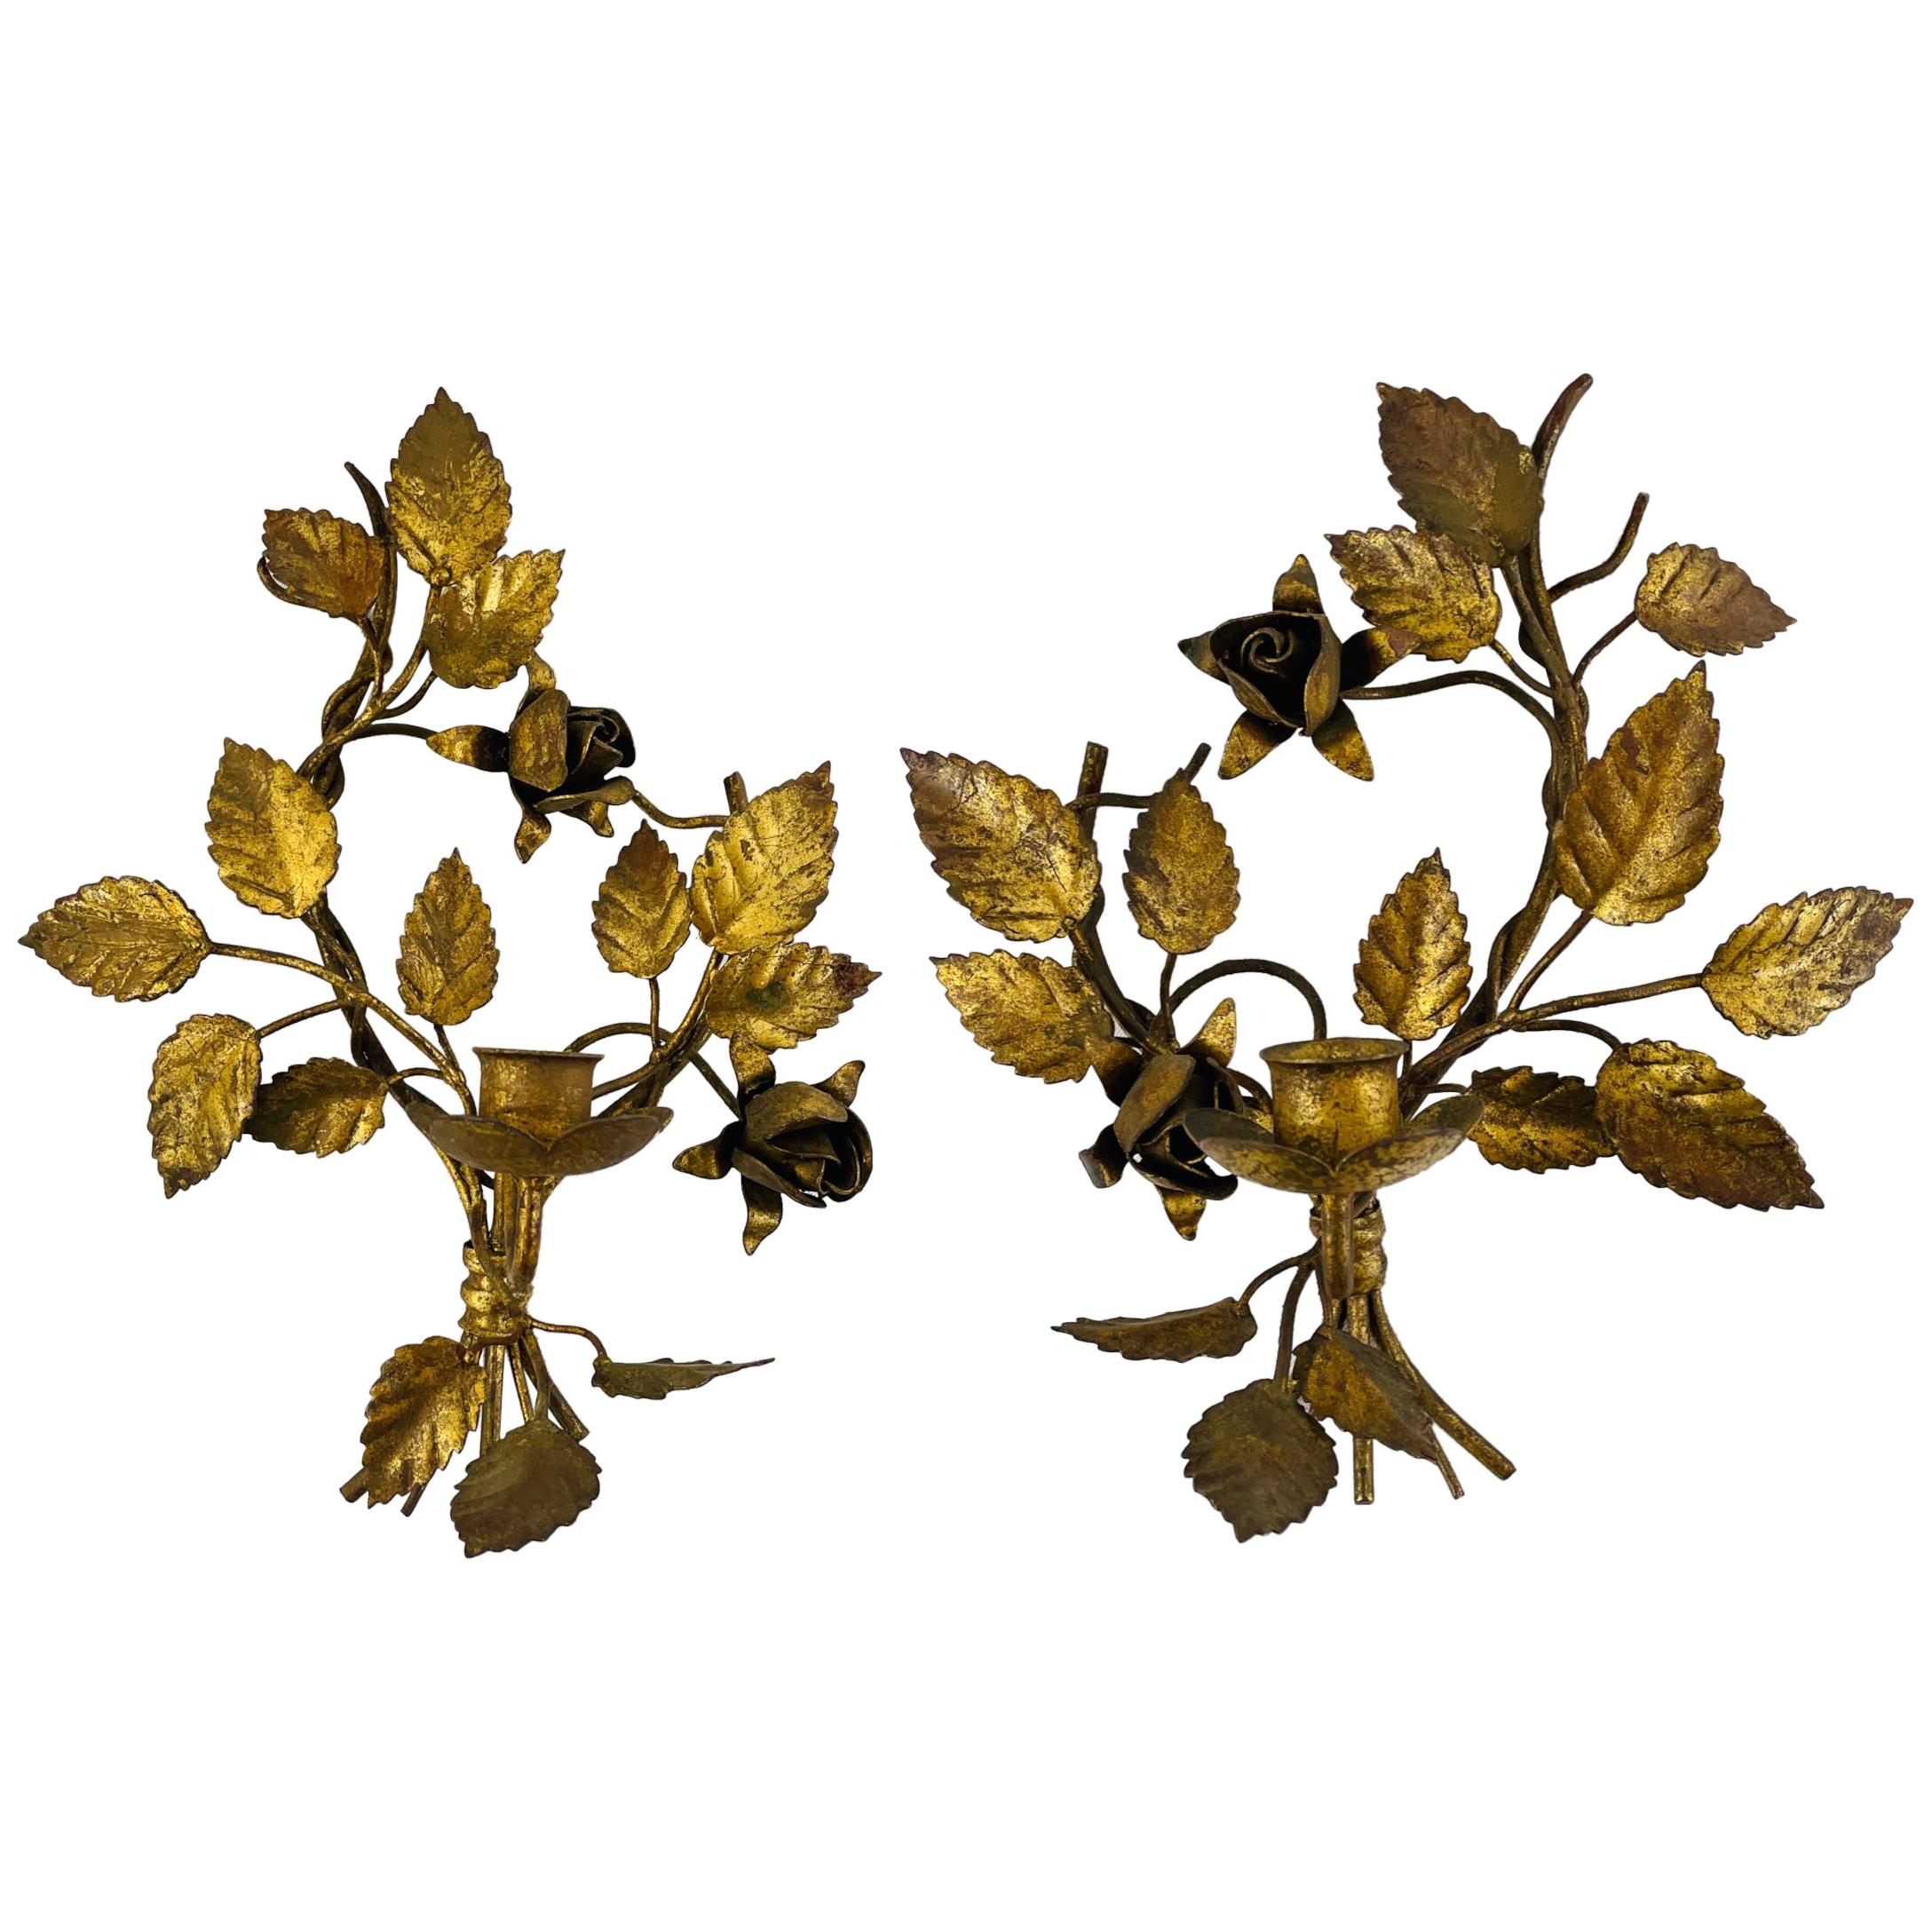 Vintage Italian leaf Design Gilt Gold Tole Metal Candle Wall Sconce, a Pair  For Sale